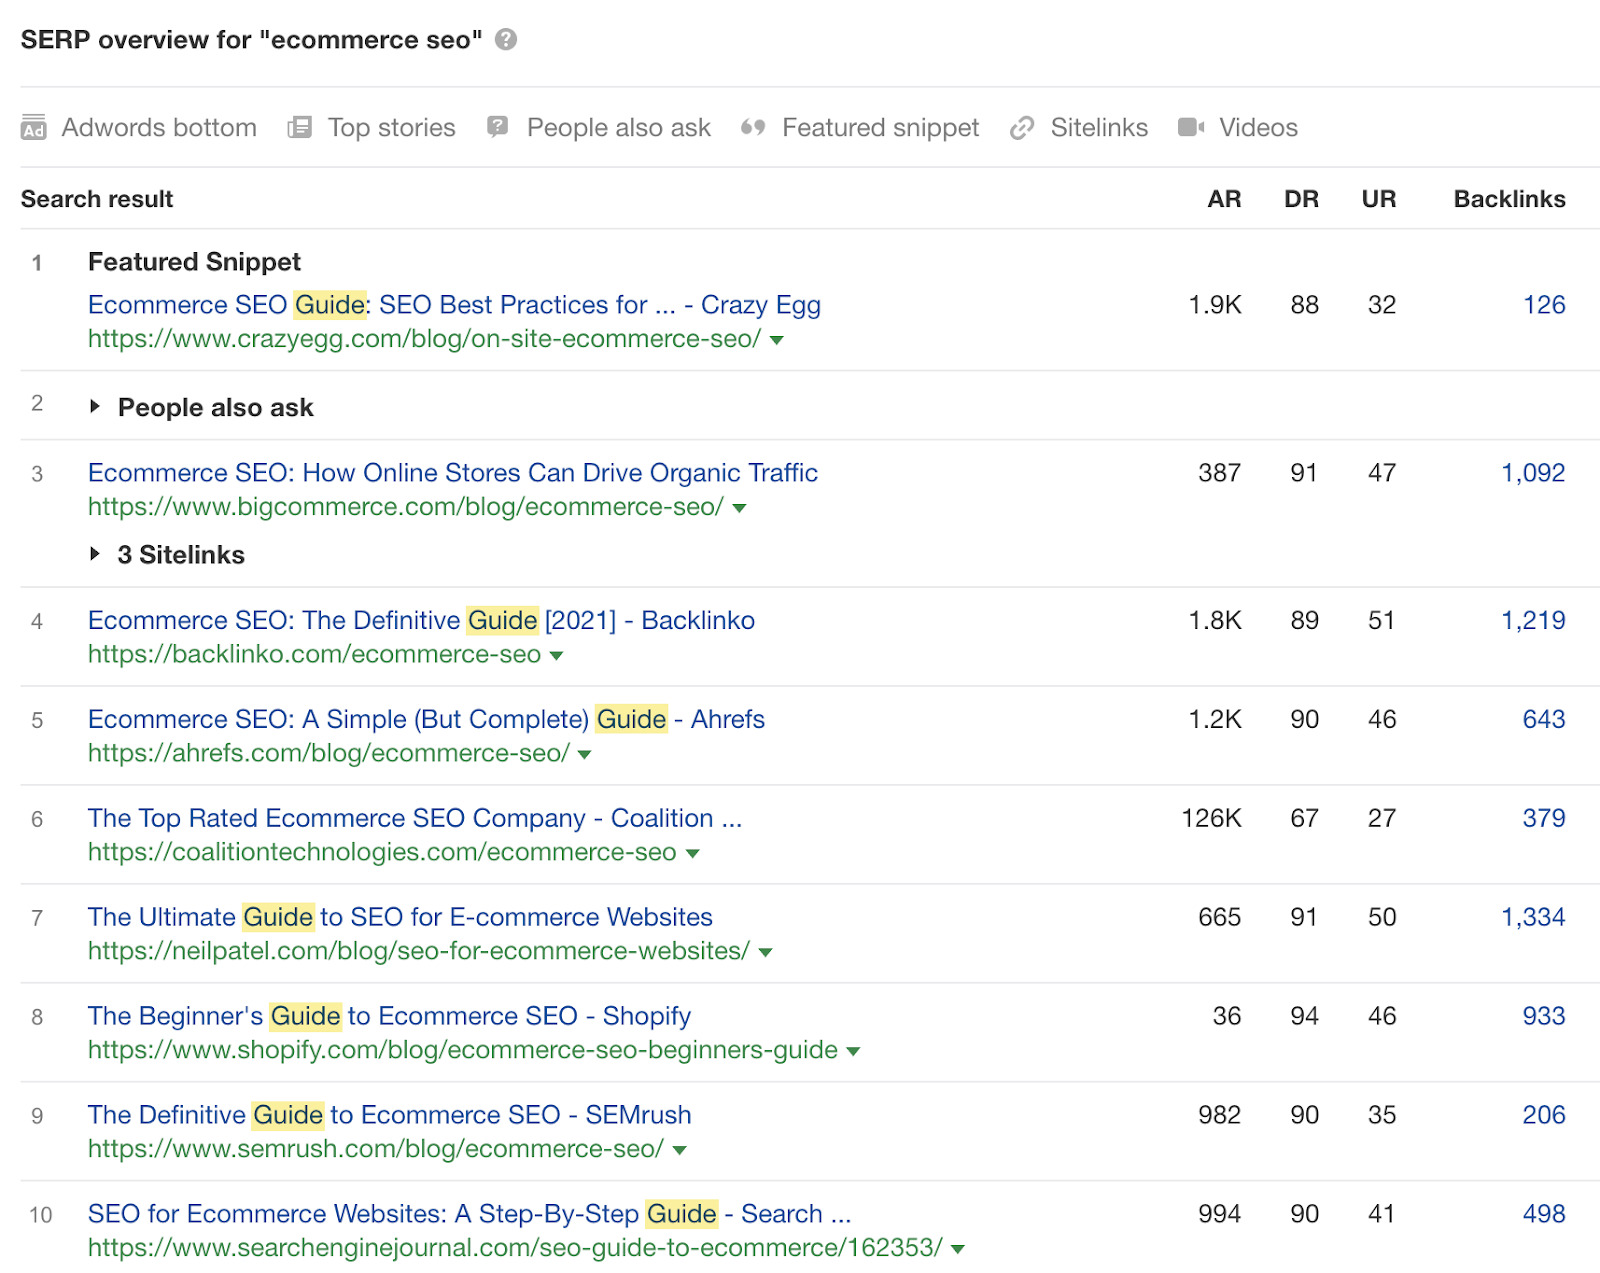 SERP overview for "ecommerce seo"